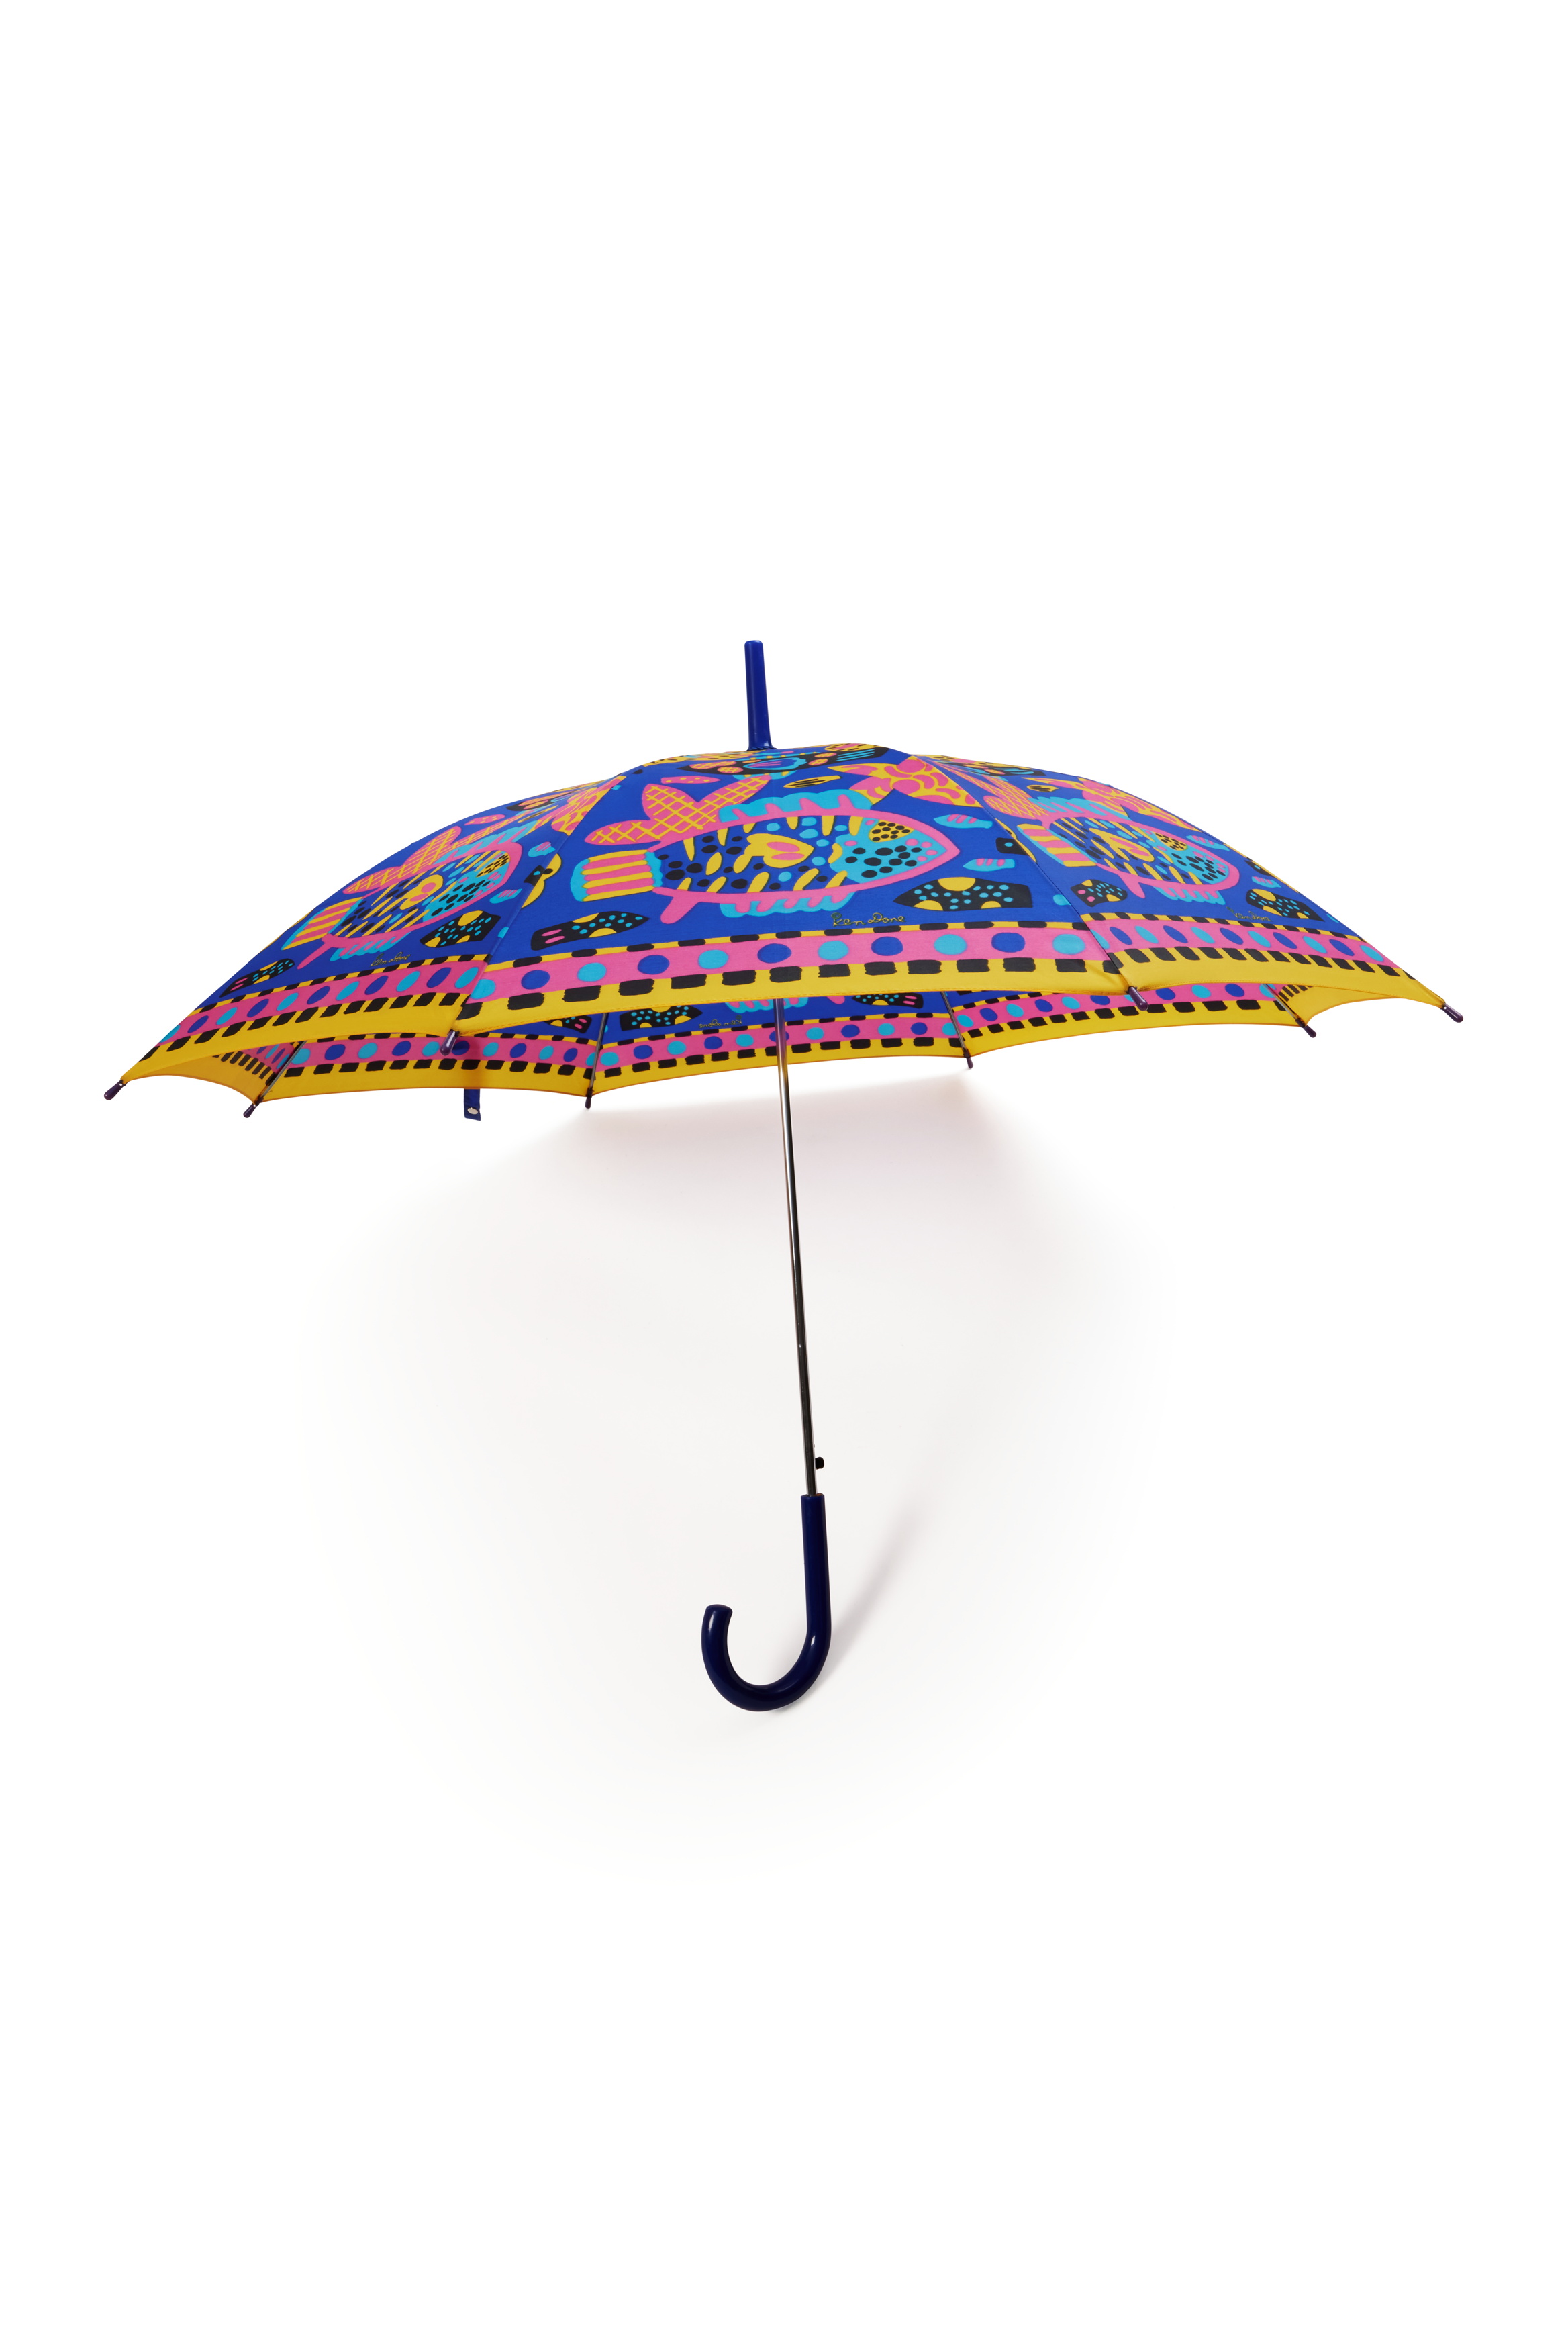 'Barrier Reef' umbrella by Ken Done design for Oroton